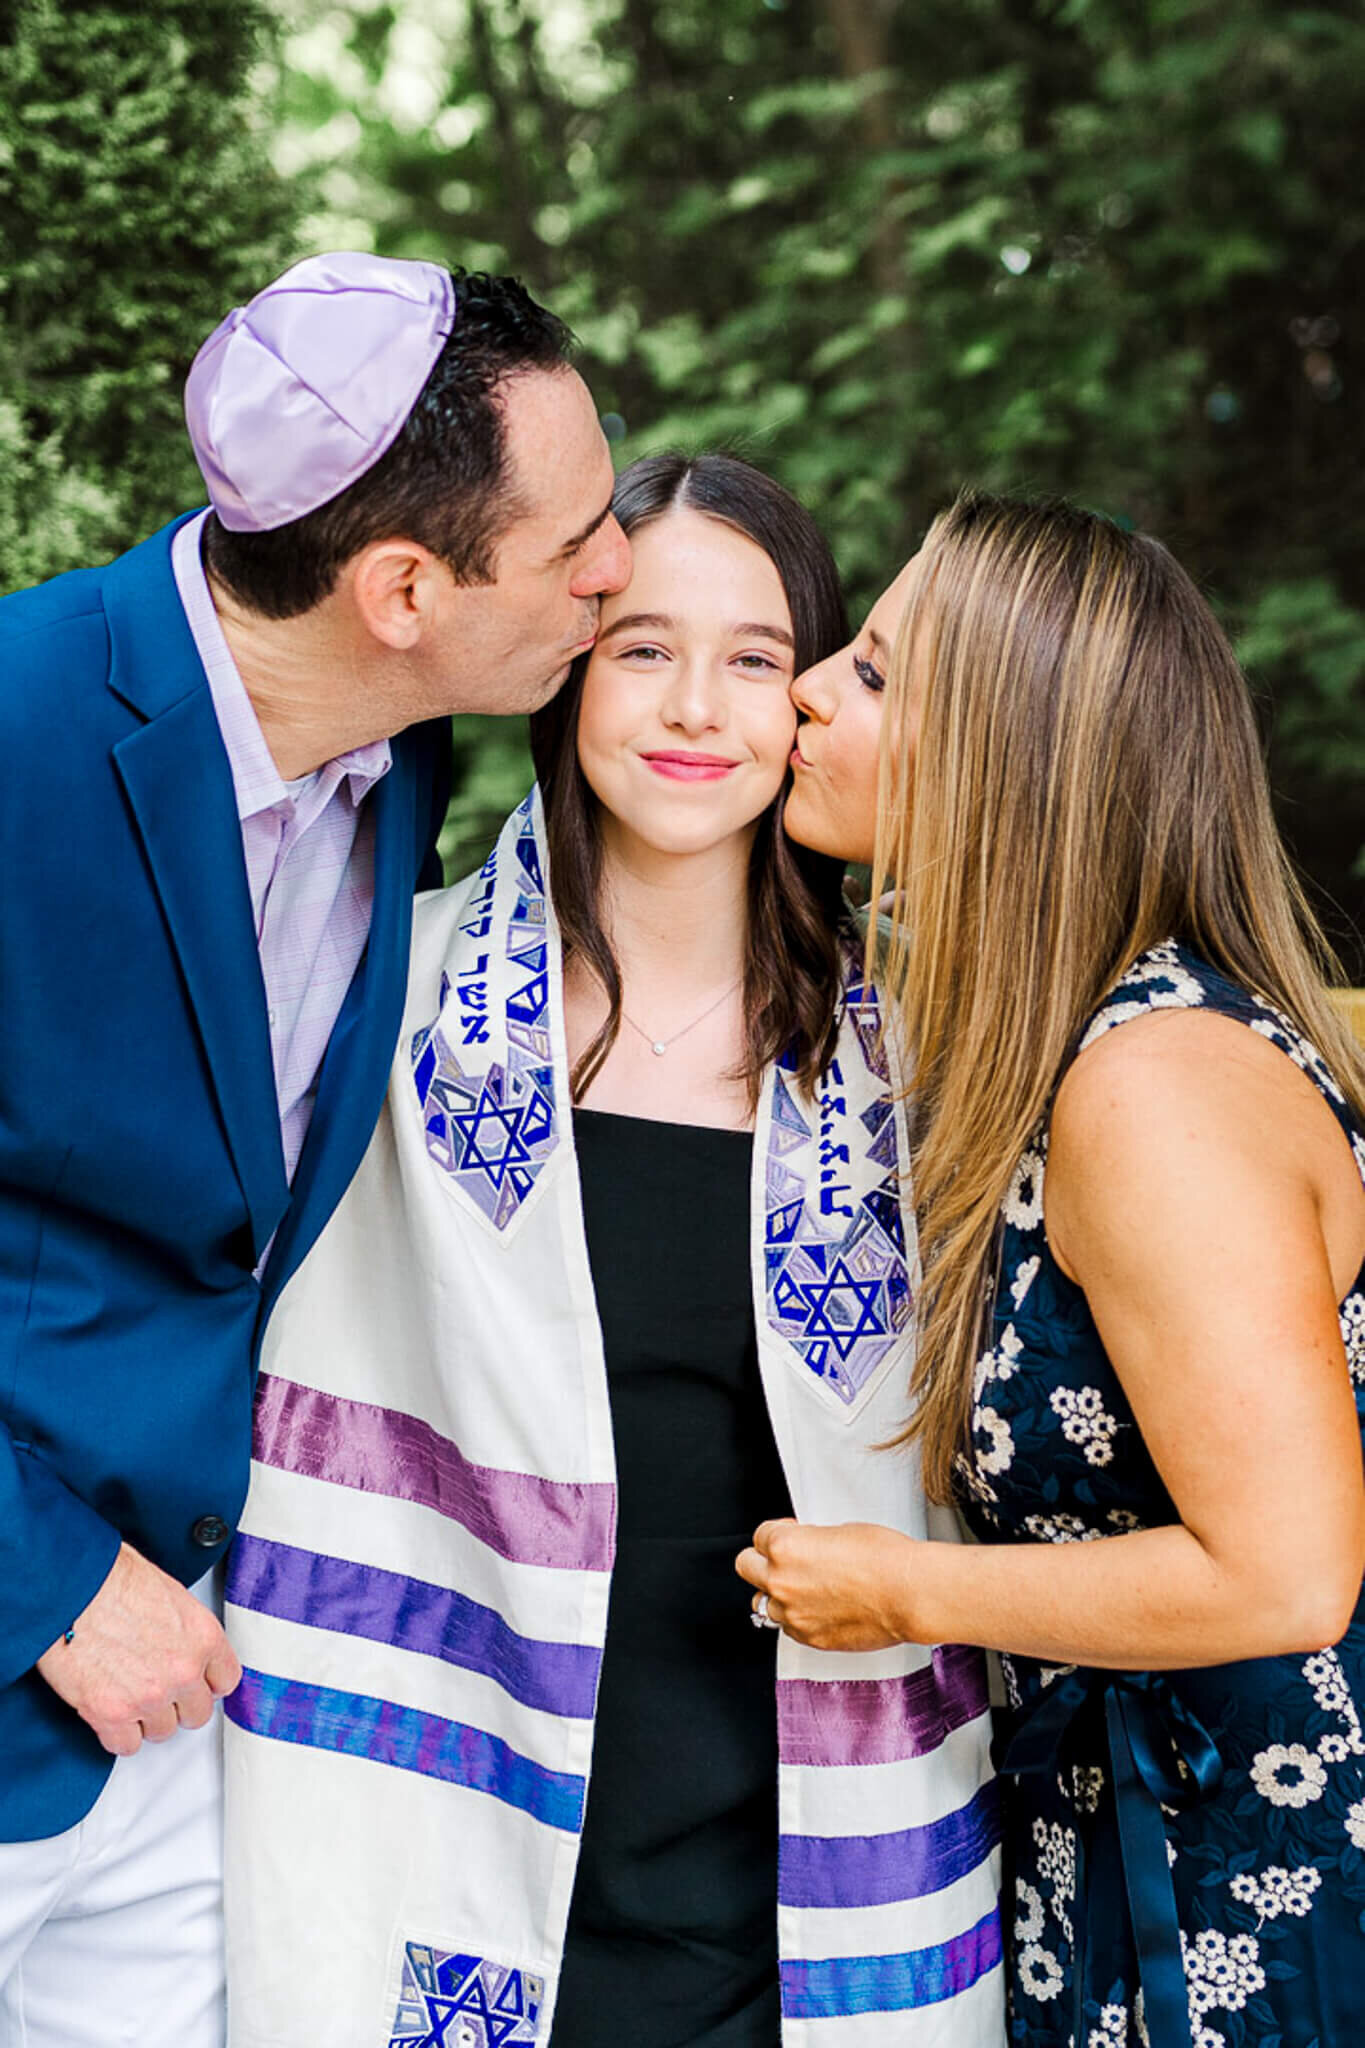 A teen girl in a decorated Tallit is kissed by mom and dad on each cheek while standing outside in a garden